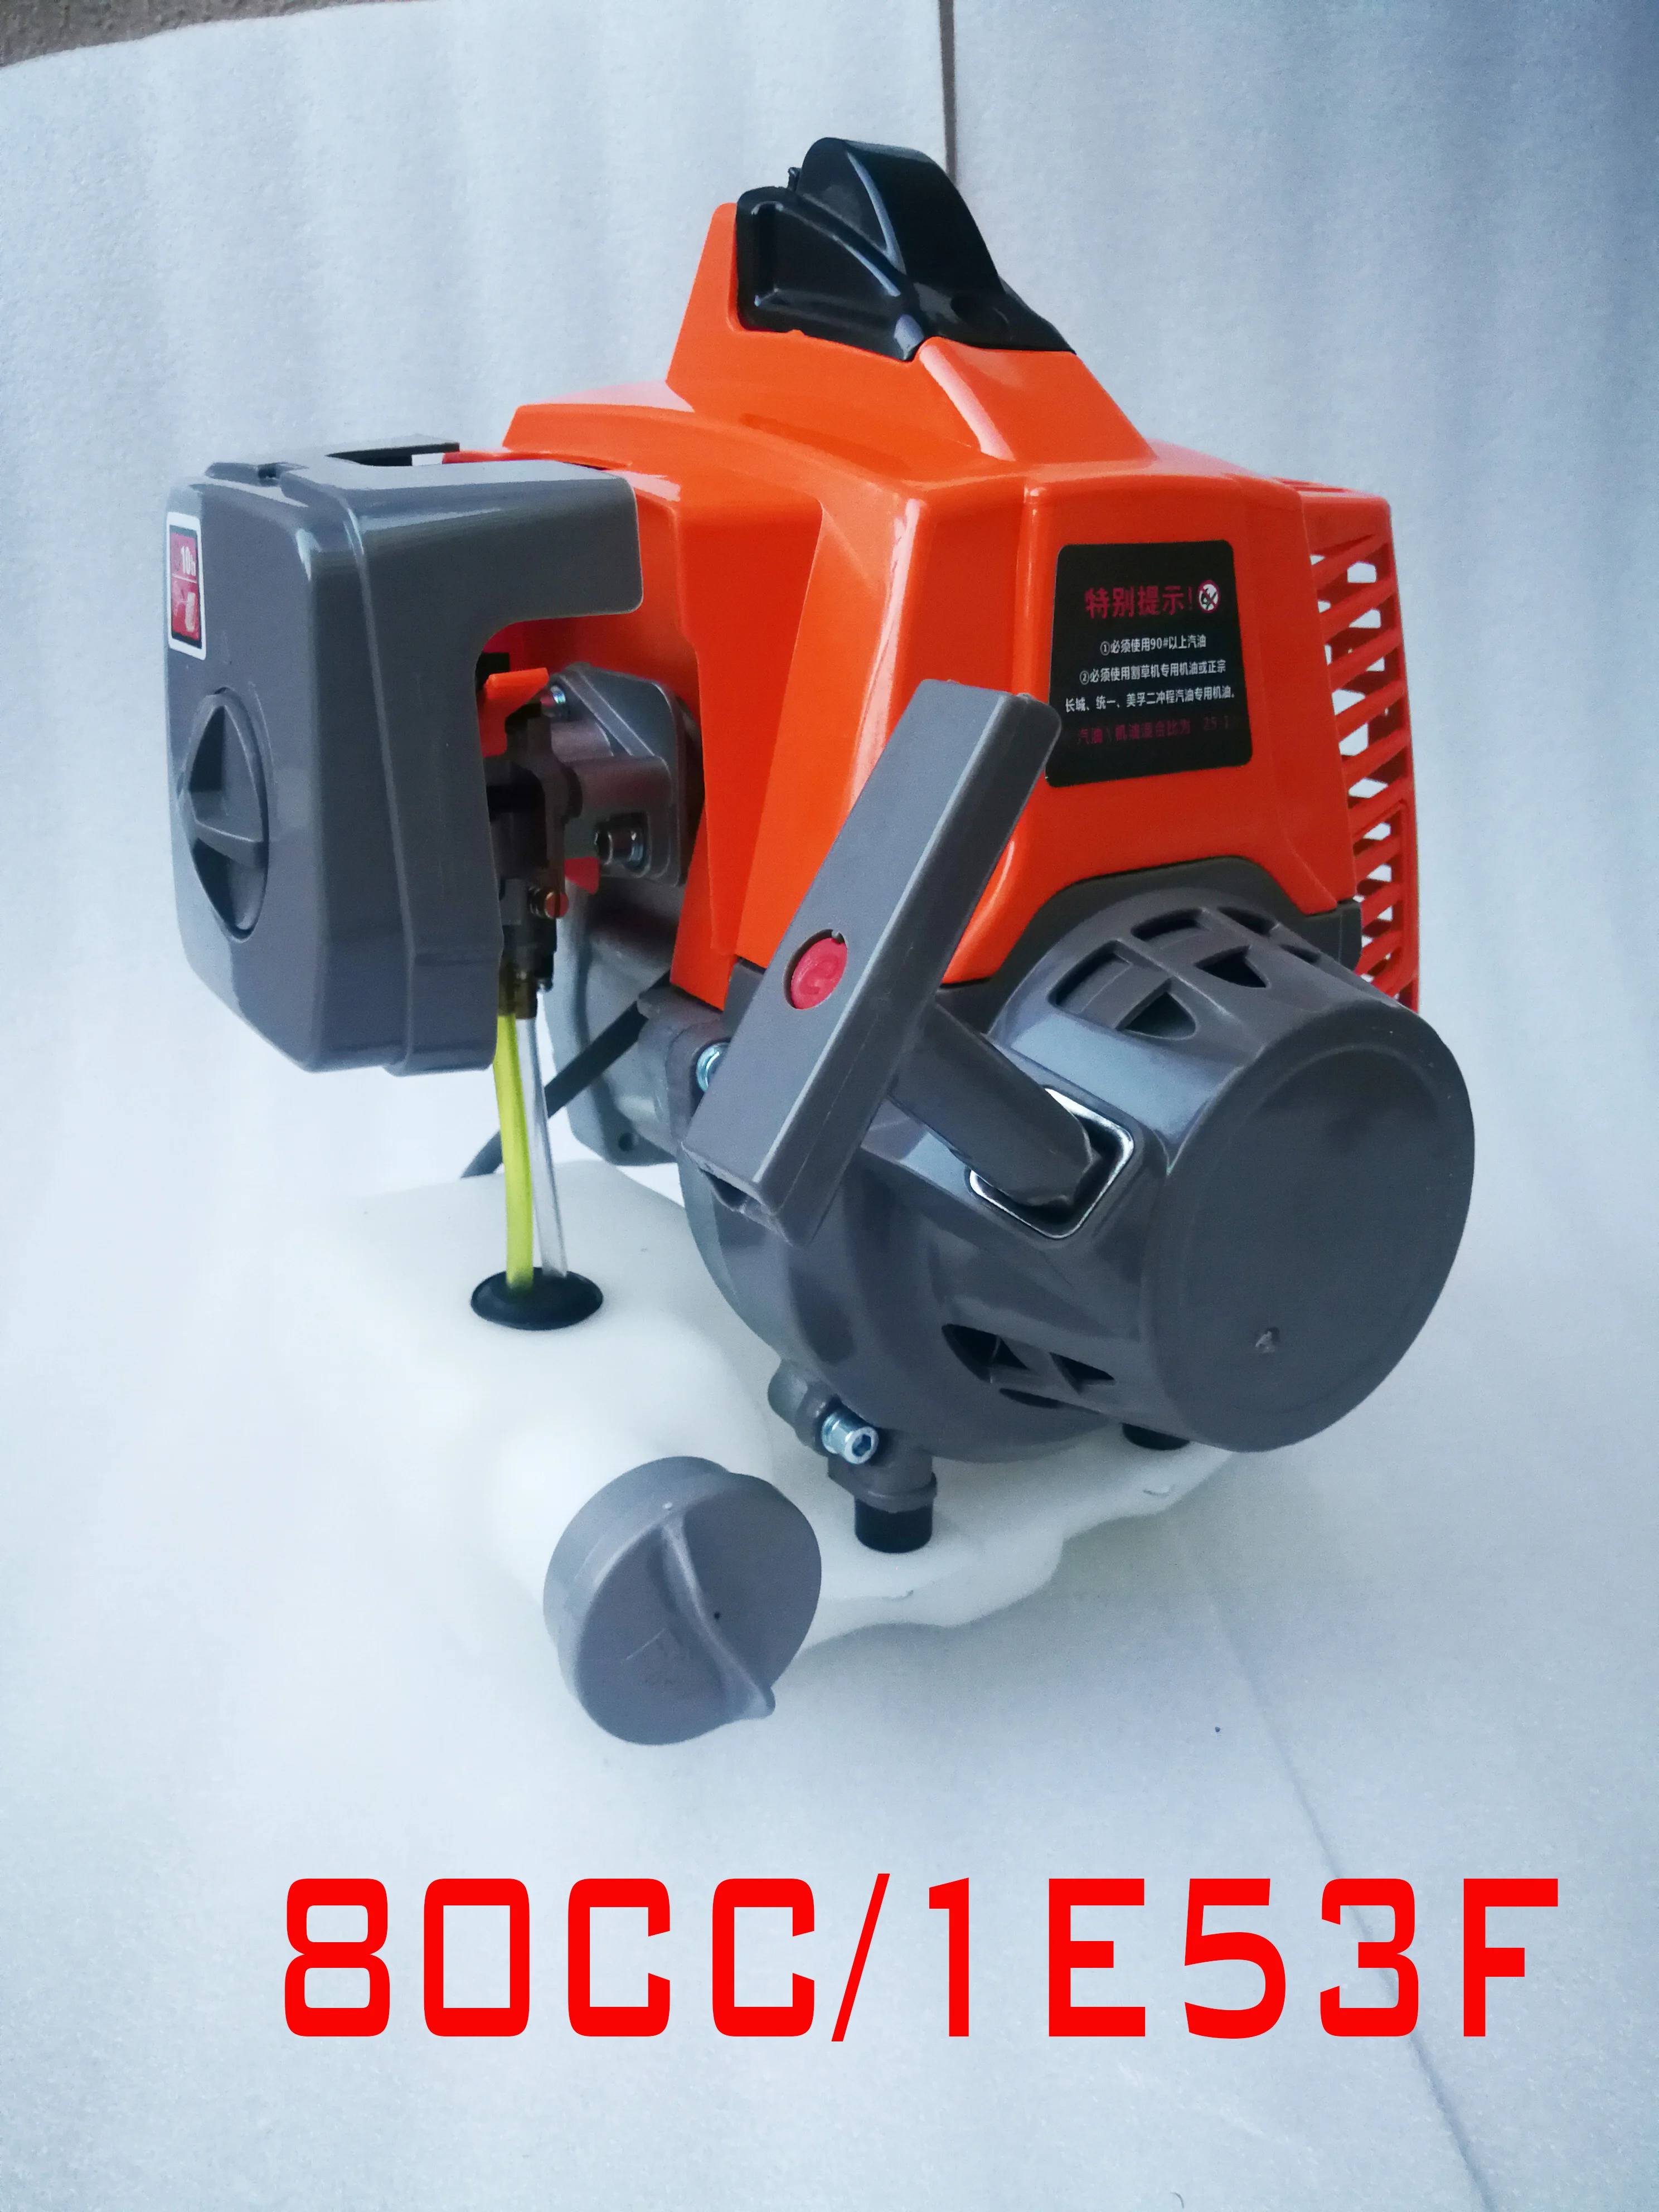 Enlarge Really 80cc 1E53F 2T Gasoline Engine 2 Stroke For Earth Drill Brush Cutter Goped Scooter Outboard Motor 53mm Big Bore